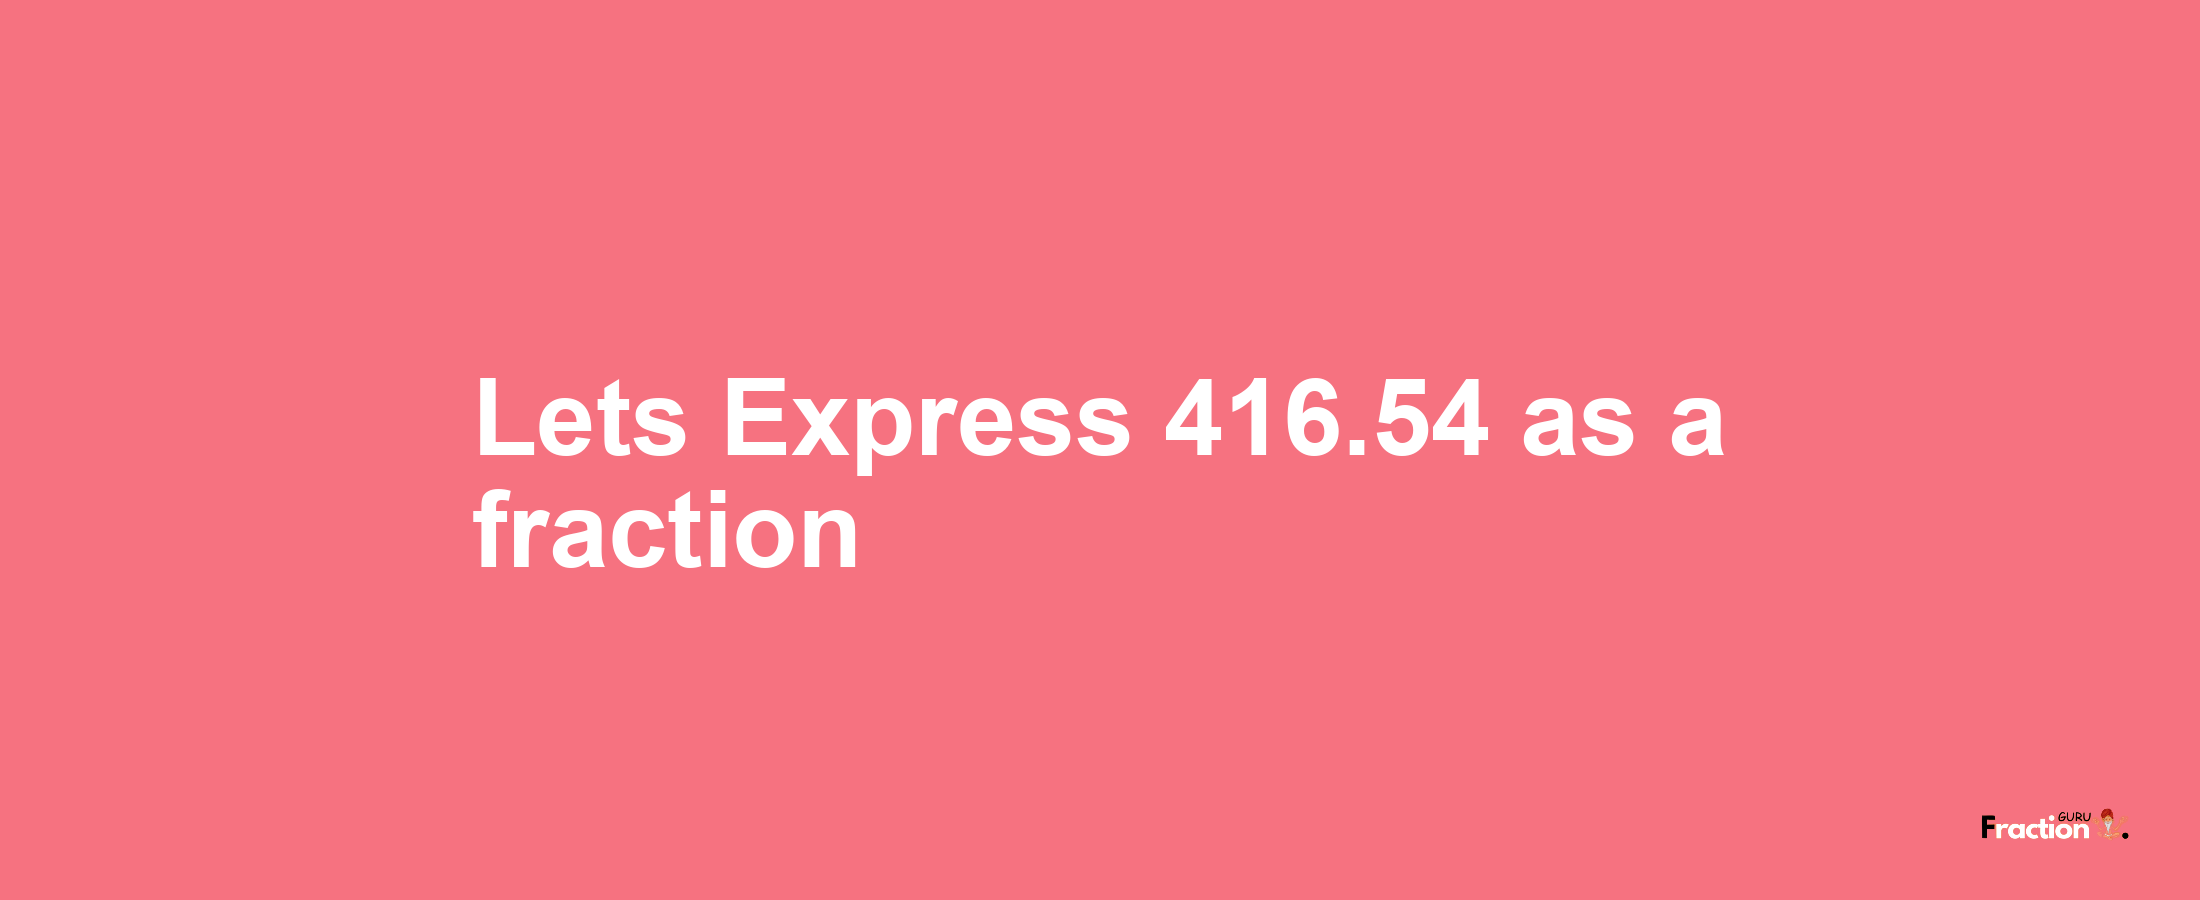 Lets Express 416.54 as afraction